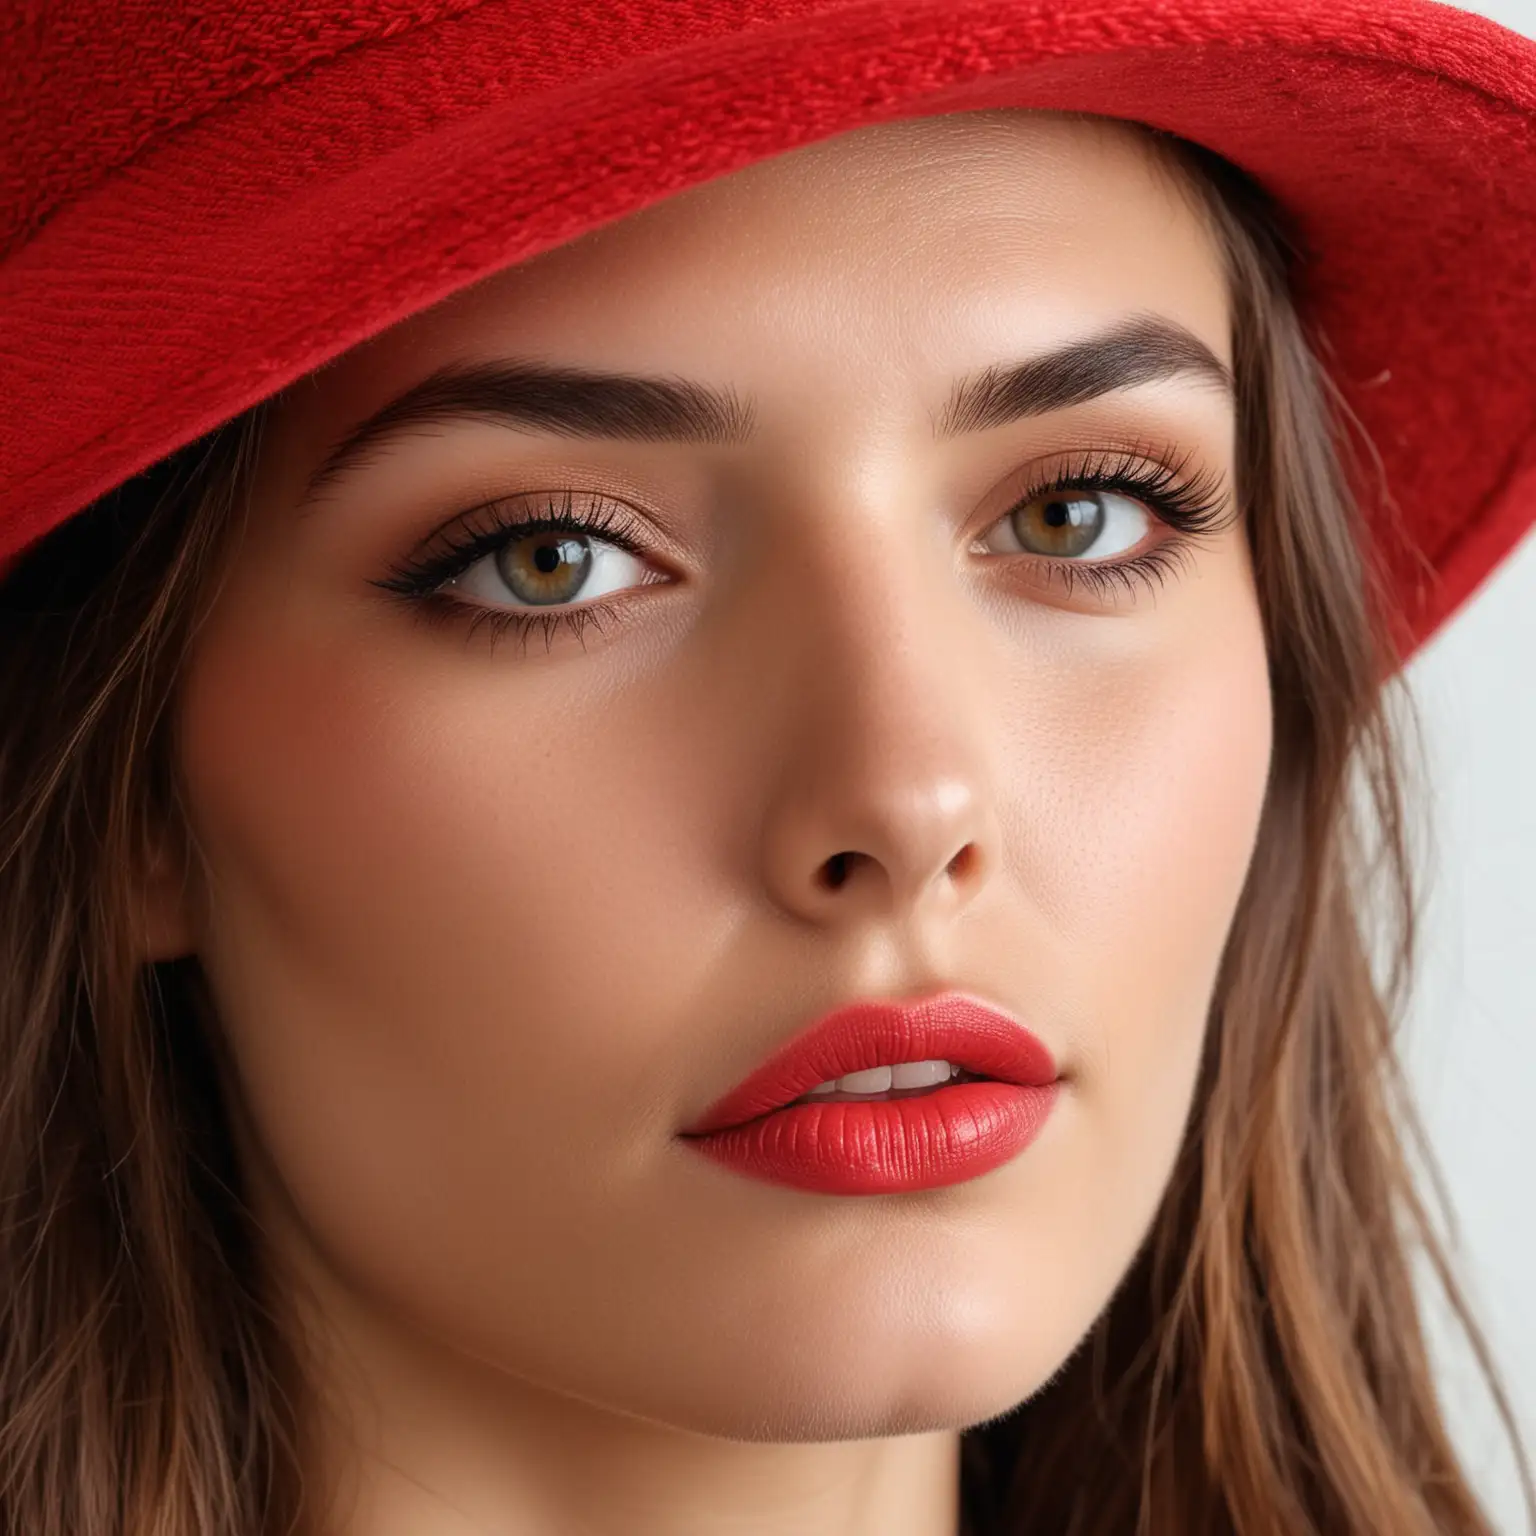 Closeup Portrait of a Model Wearing a Red Hat